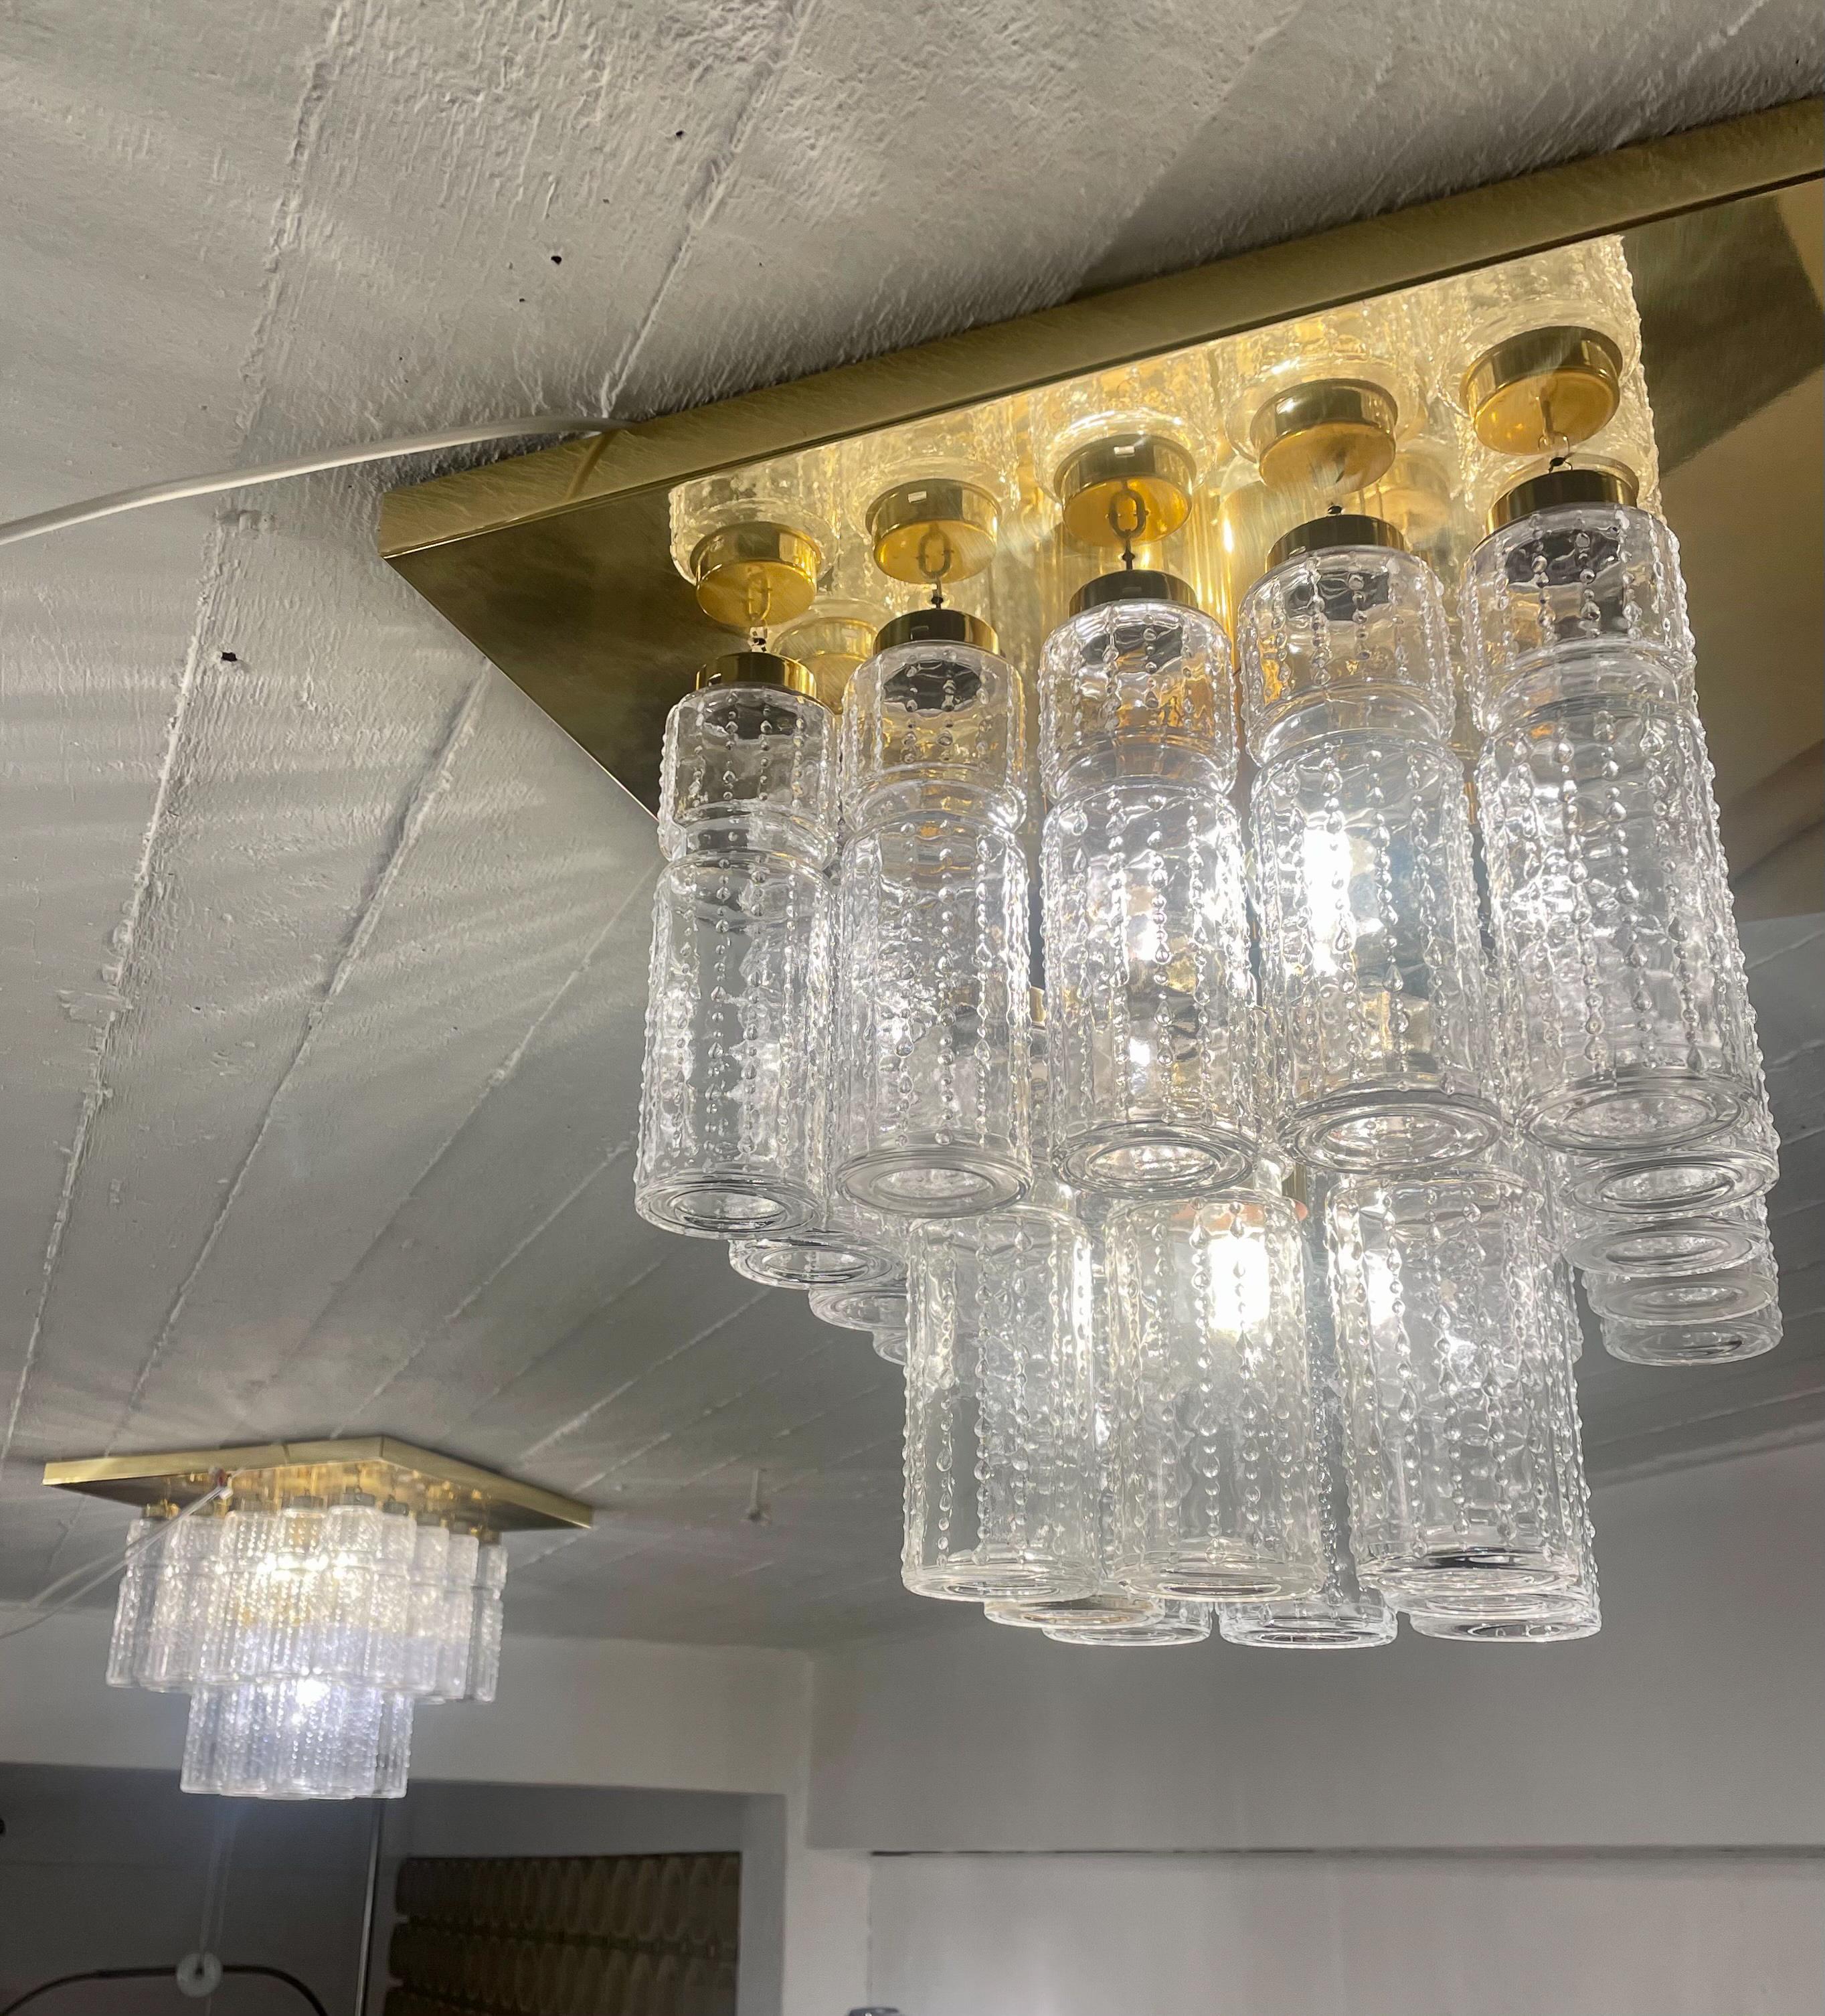 Mid-Century Modern ceiling light, brass and glass by Kalmar, Austria, 1960s
Price for 1.
4 available 
Measures: 46 x 46 x 34cm.